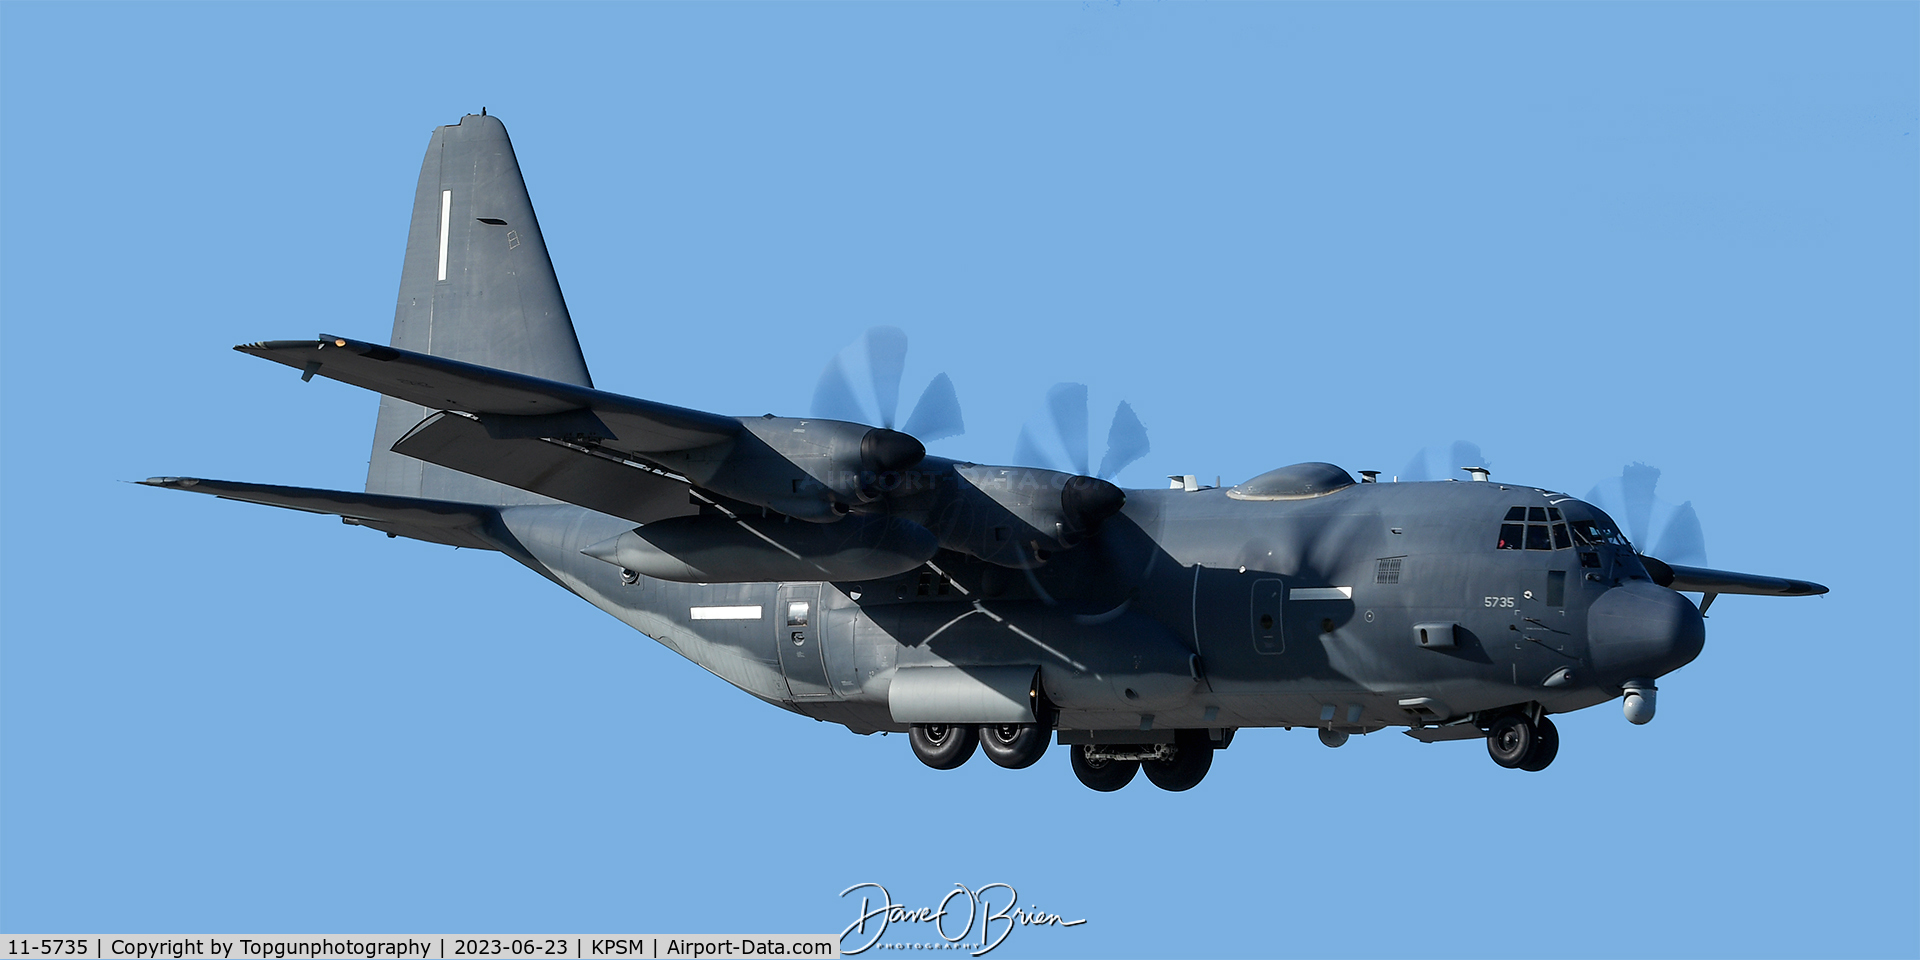 11-5735, 2013 Lockheed Martin MC-130J Ghostrider C/N 382-5735, SHADOW99 shooting a missed approach and then heads up the coast to Portland ME